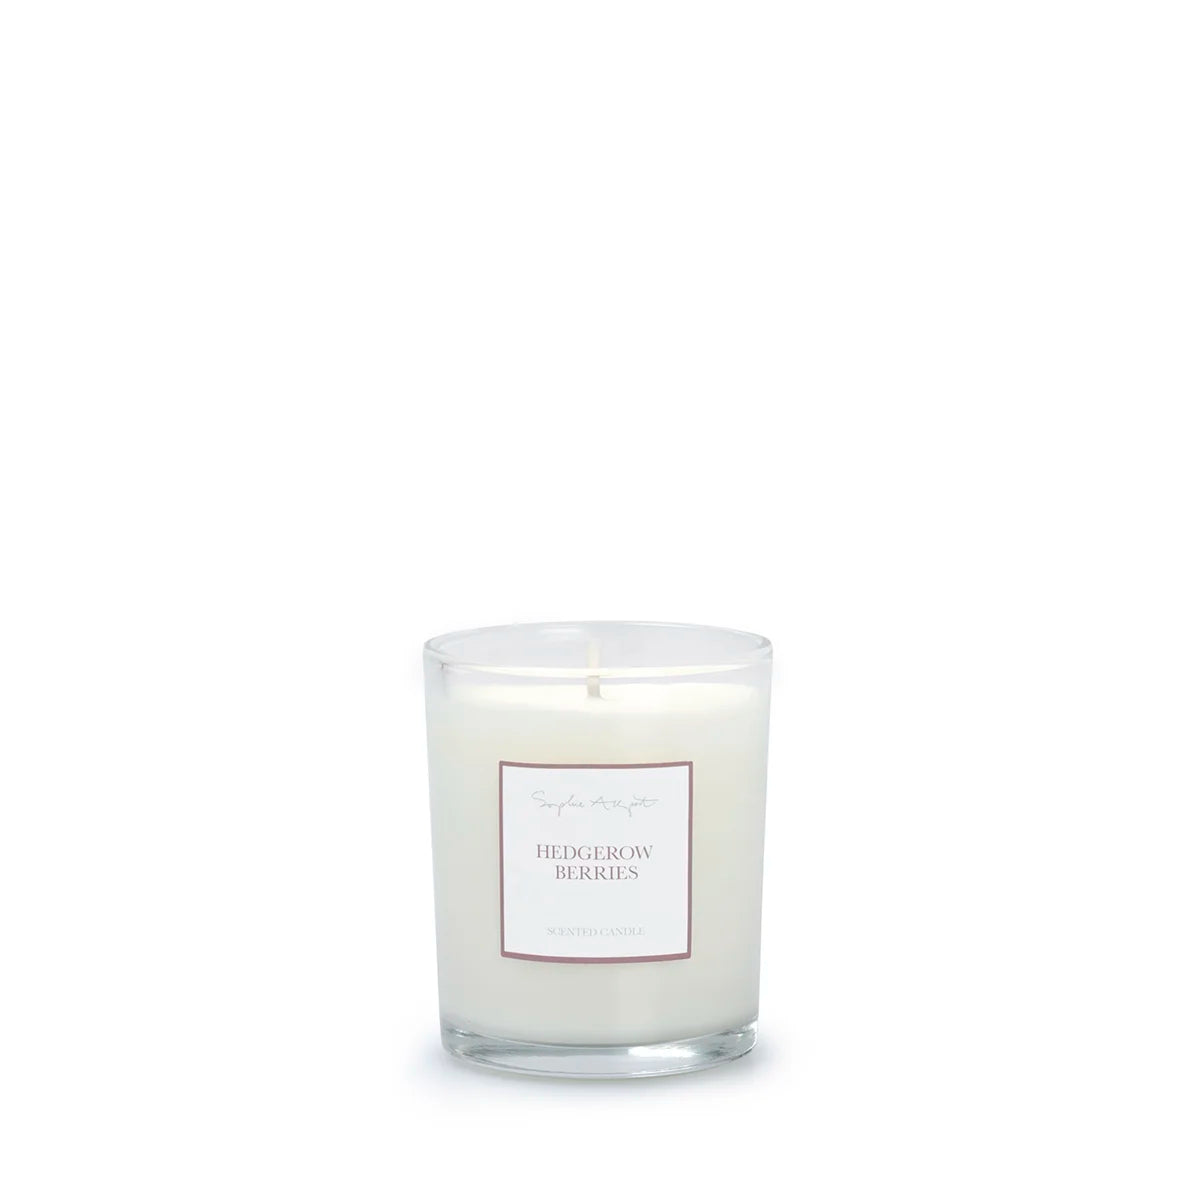 Hedgerow Berries Candle - 180g by Sophie Allport